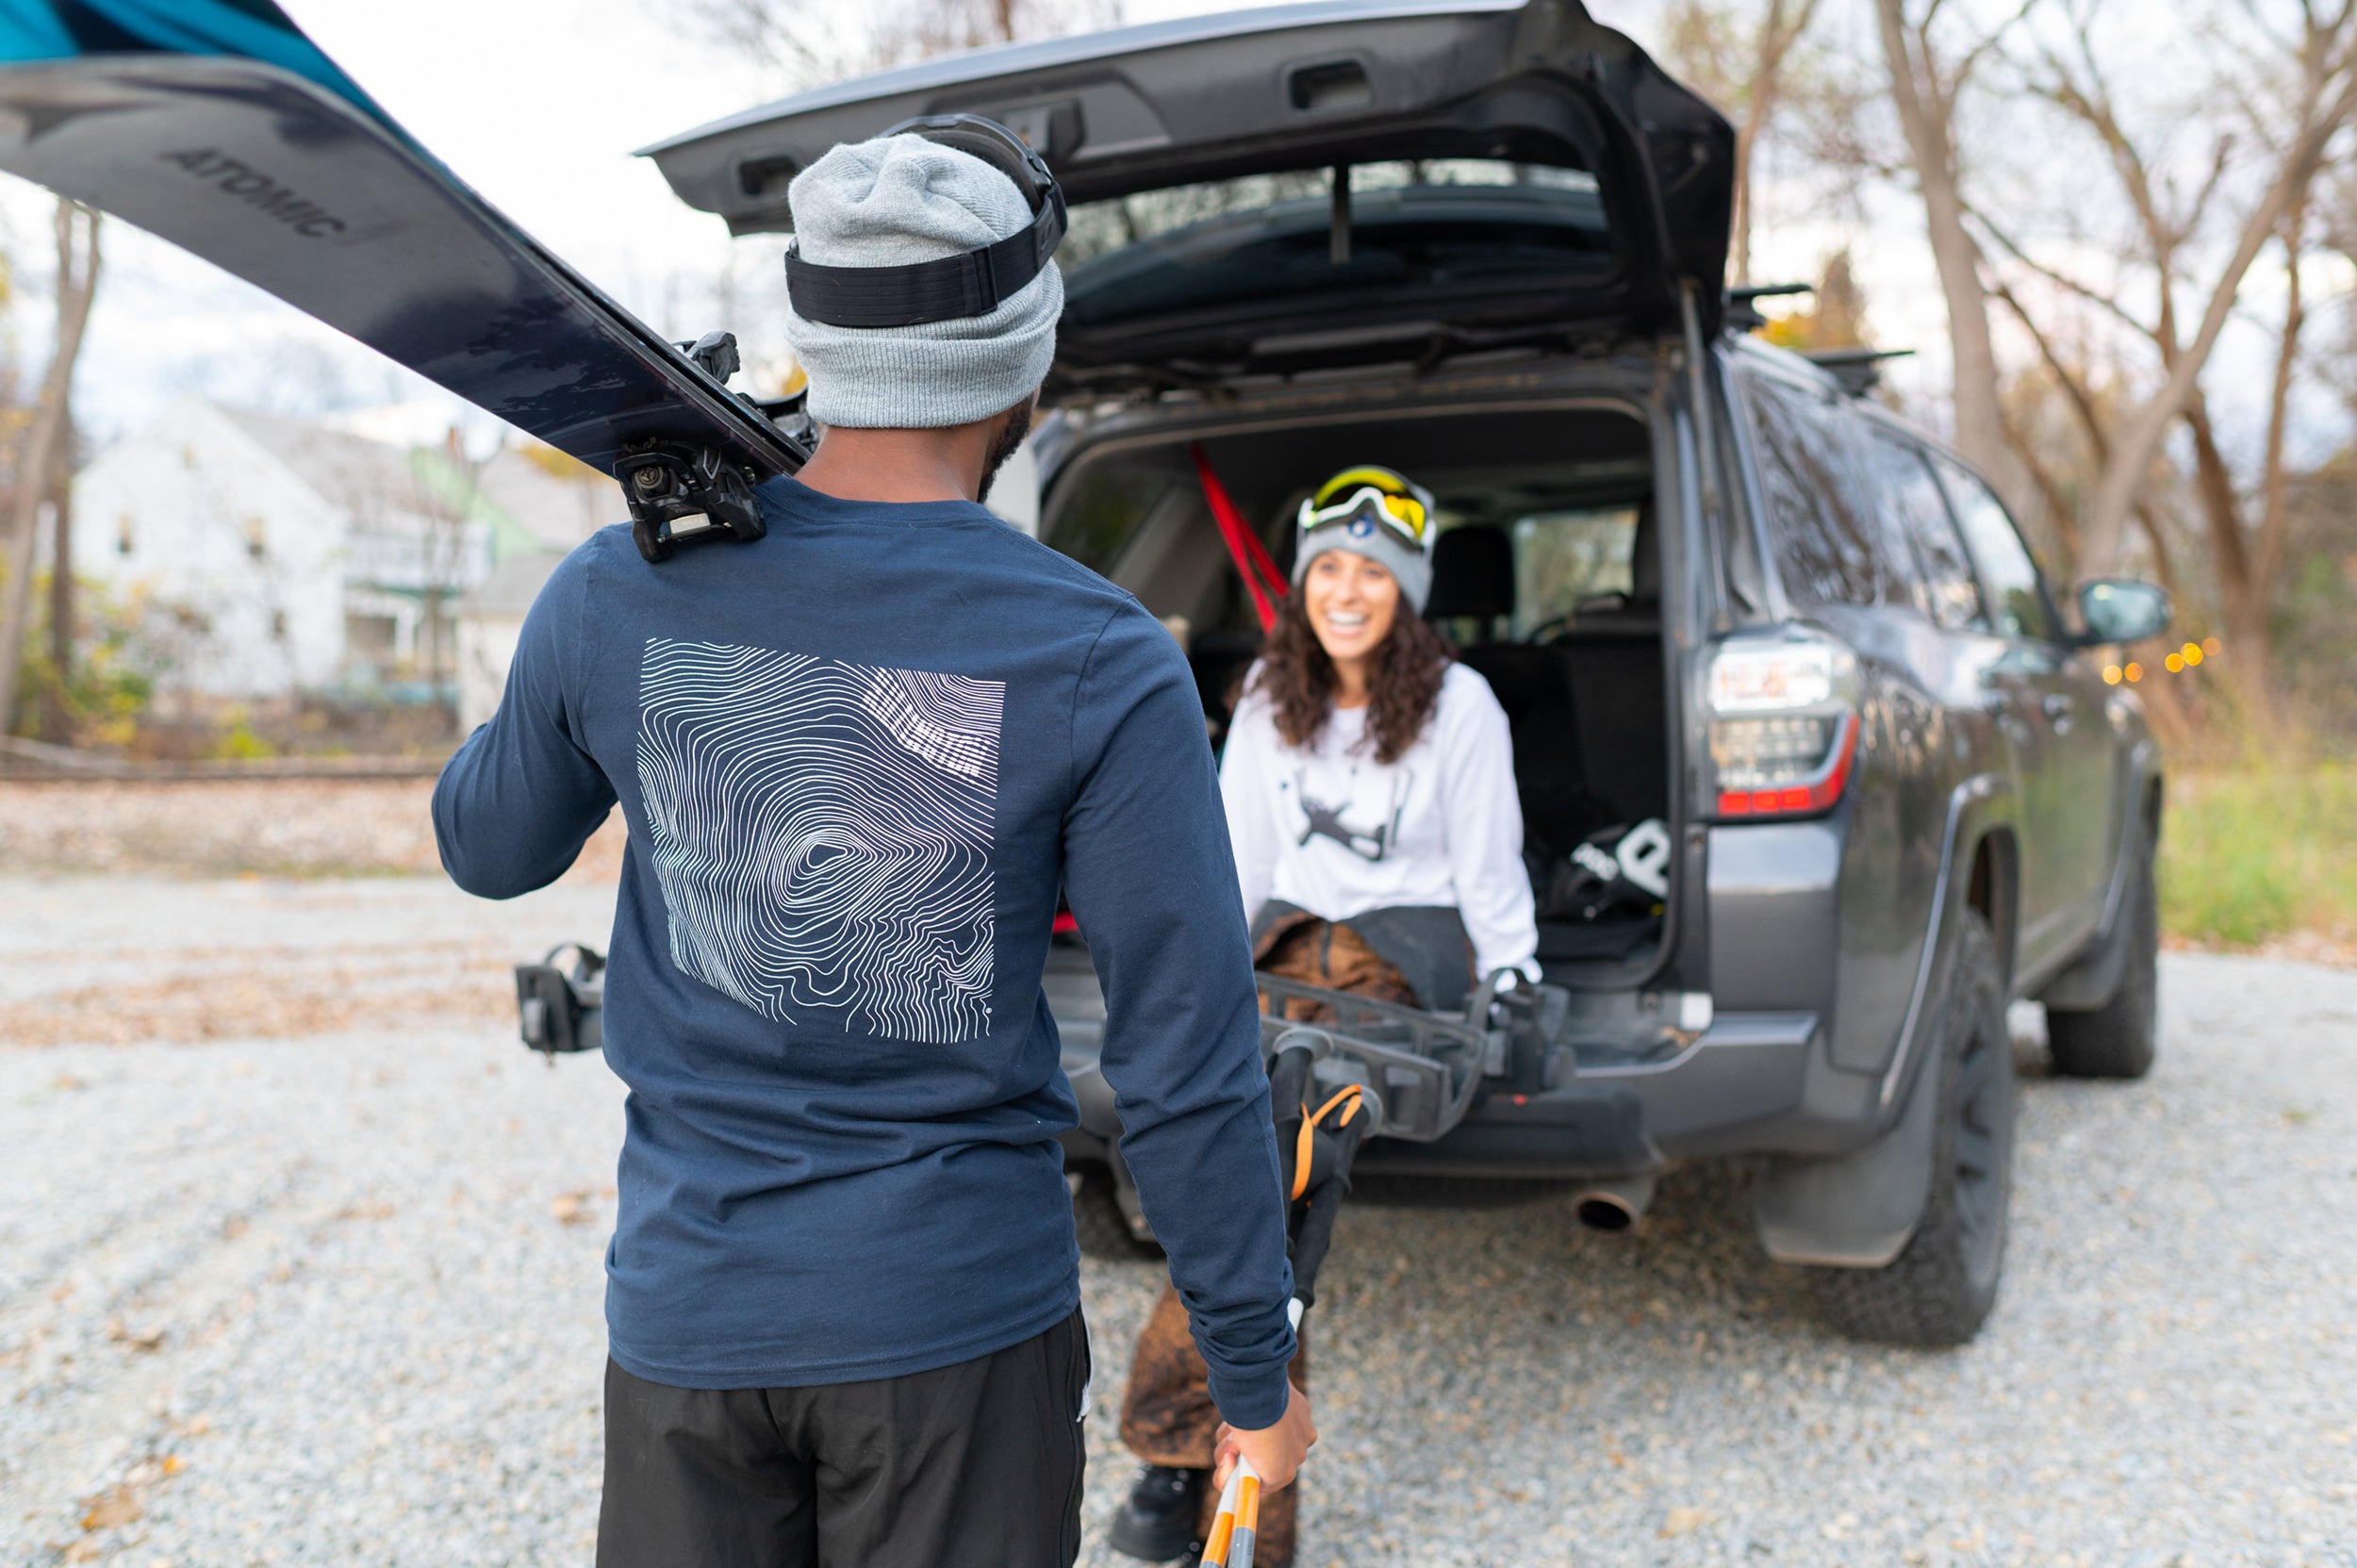 Person carrying skis towards a car with a person sitting on the back of car both wearing Vermont Eclectic Company t-shirts